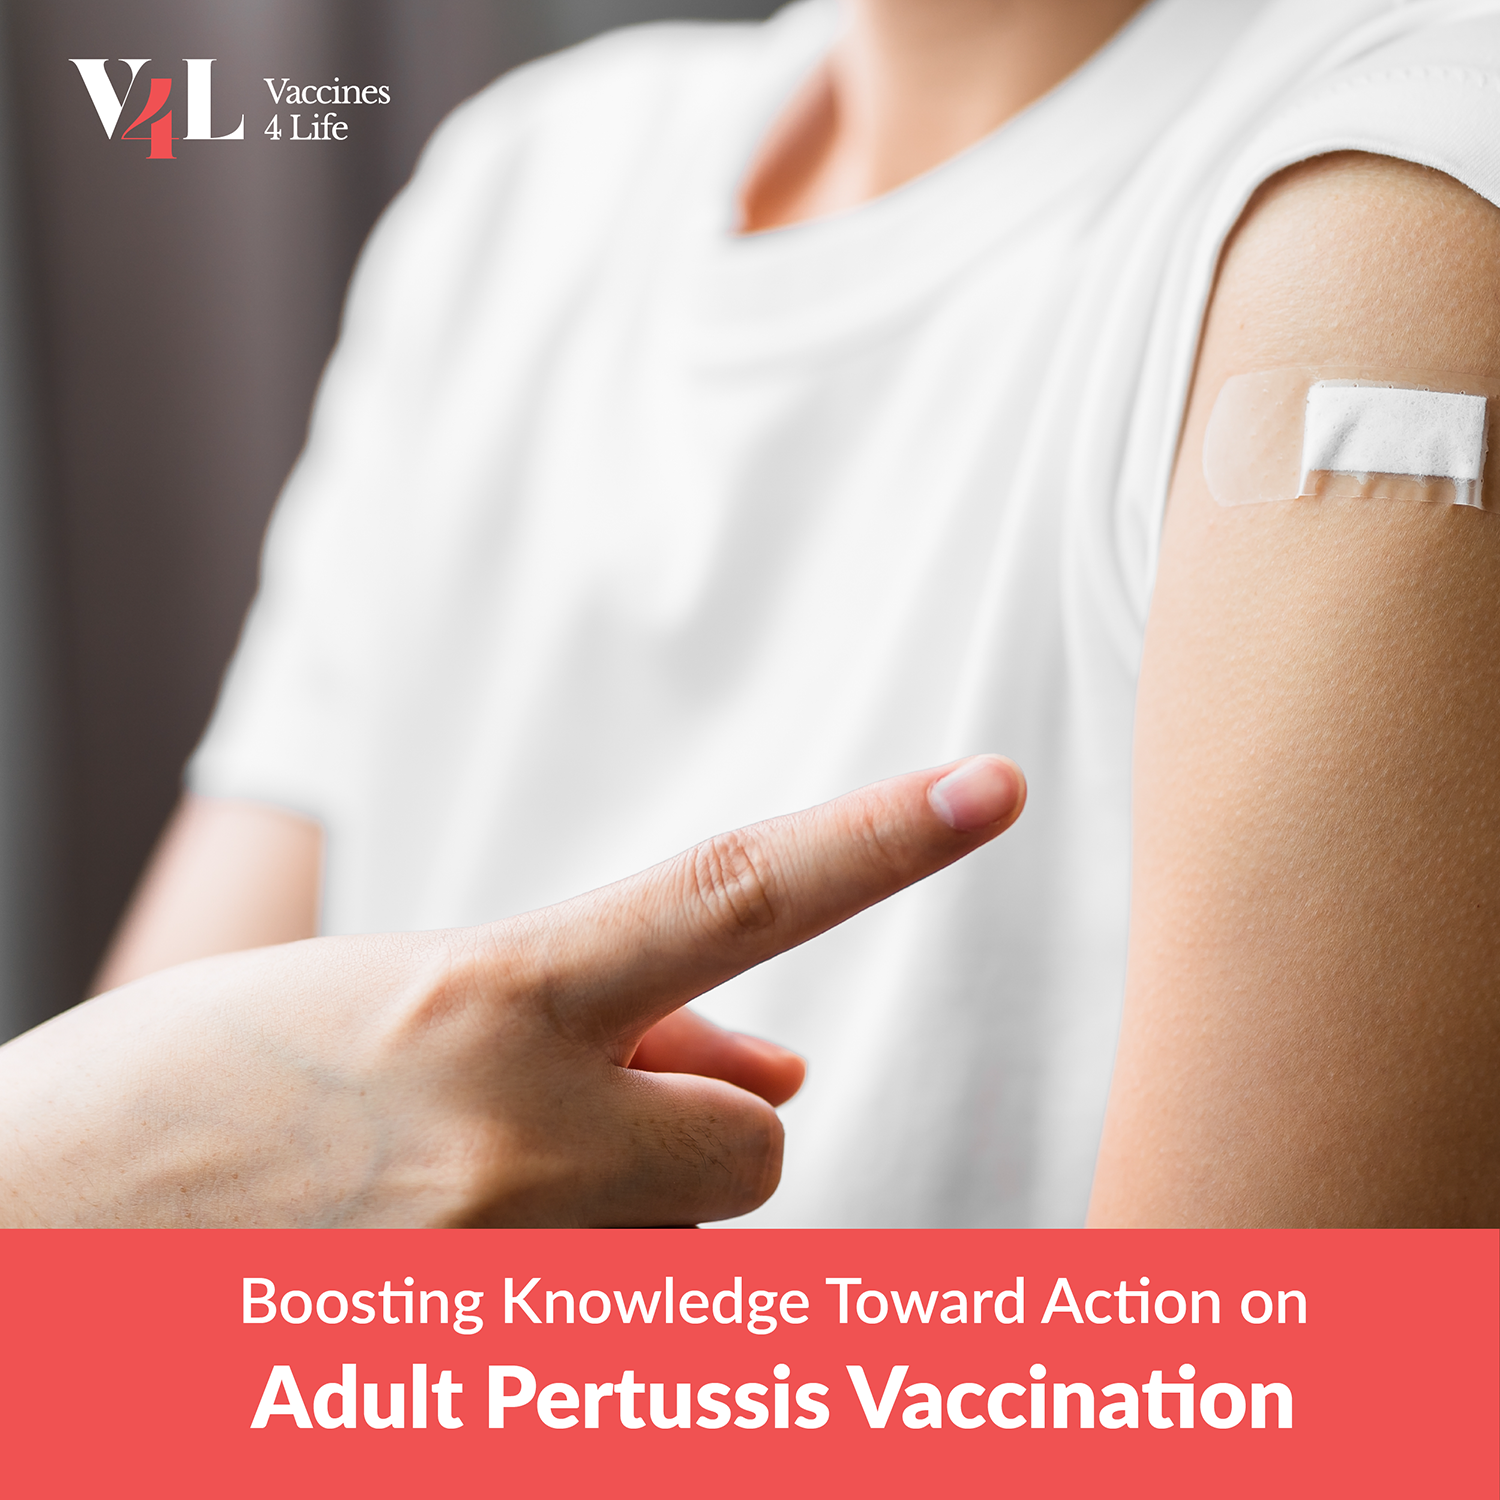 Boosting Knowledge Toward Action on Adult Pertussis Vaccination - Instagram banner